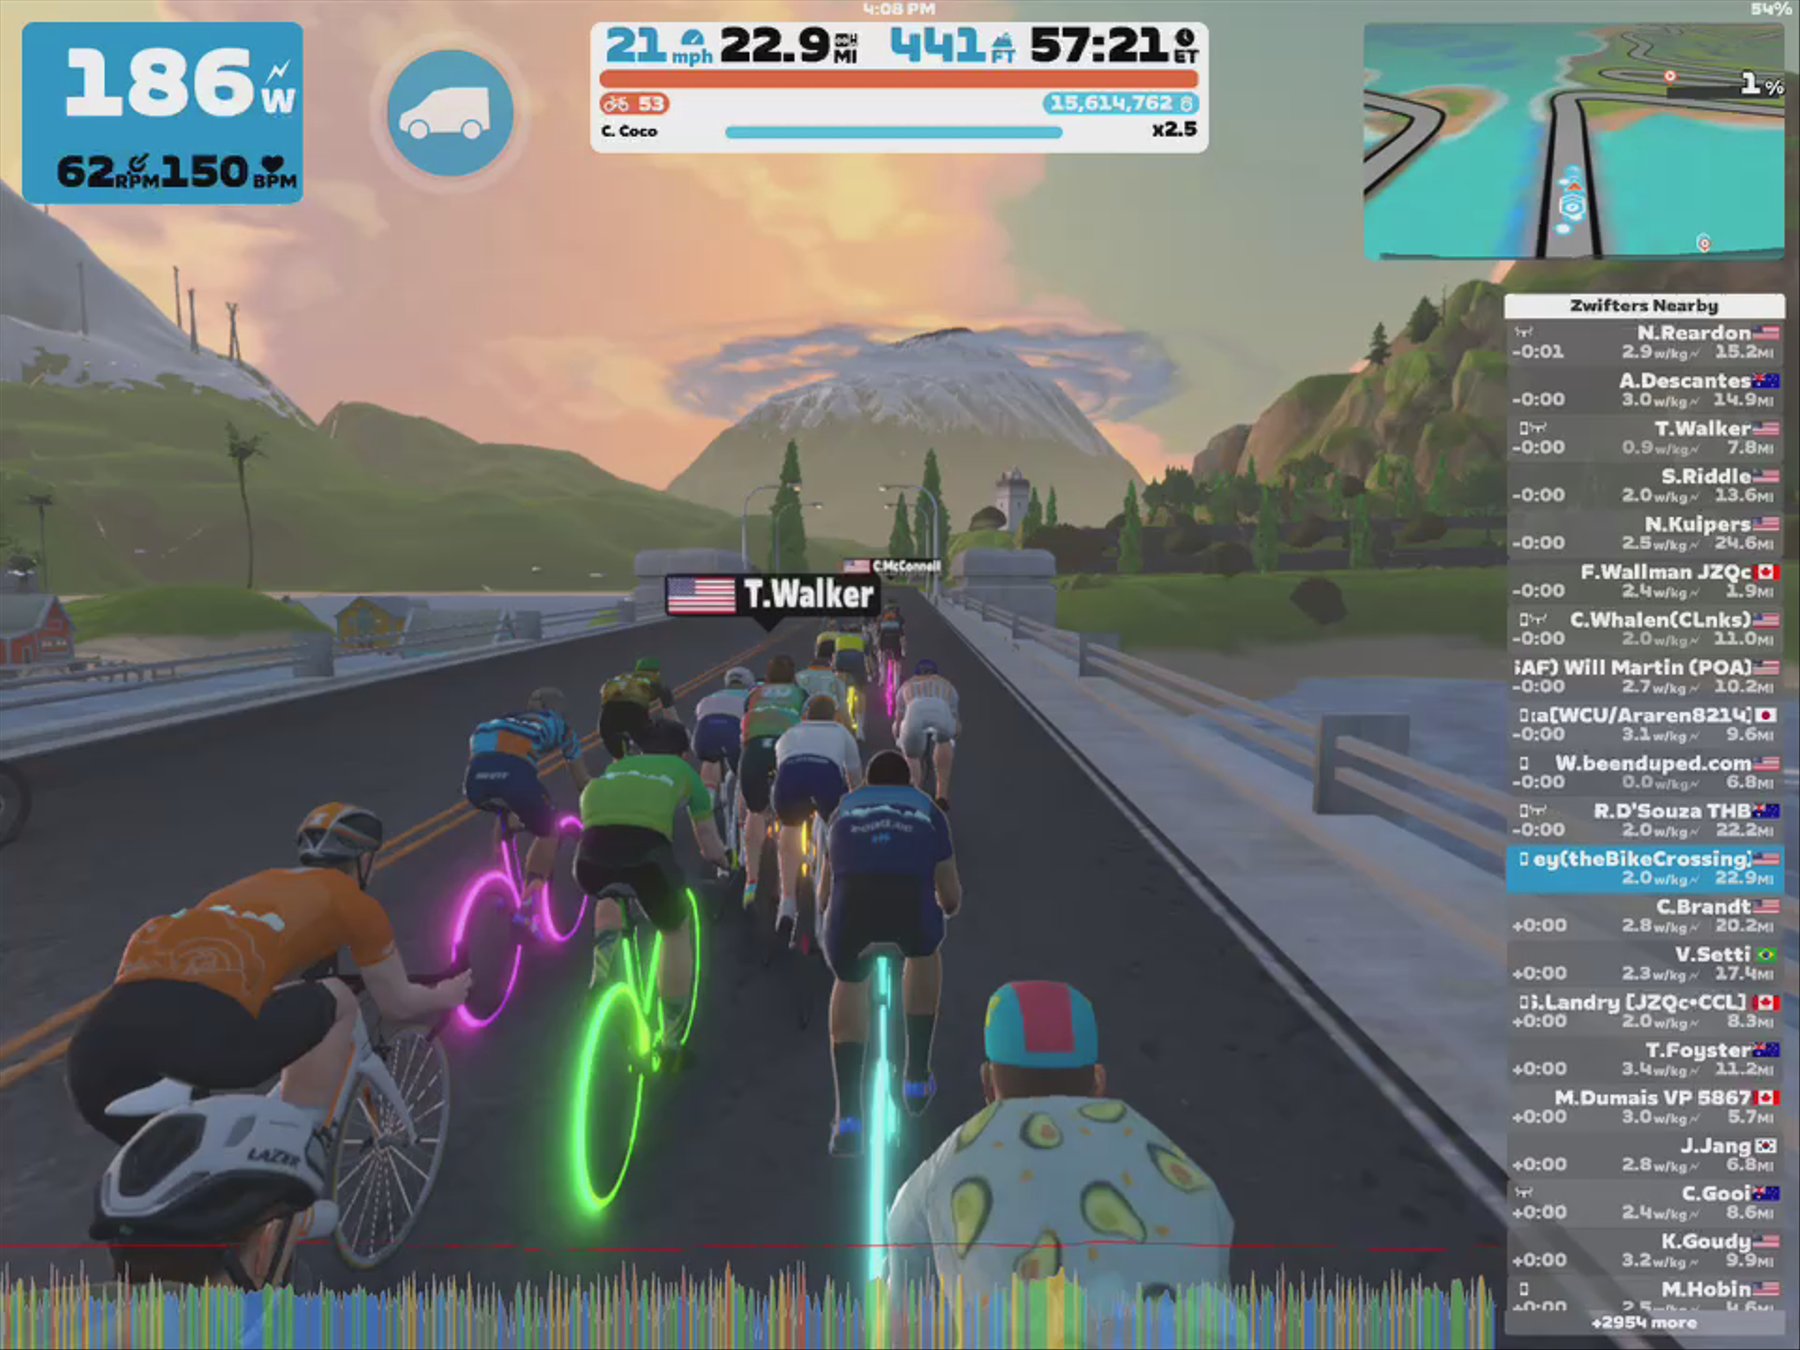 Zwift - Pacer Group Ride: Watopia's Waistband in Watopia with Coco